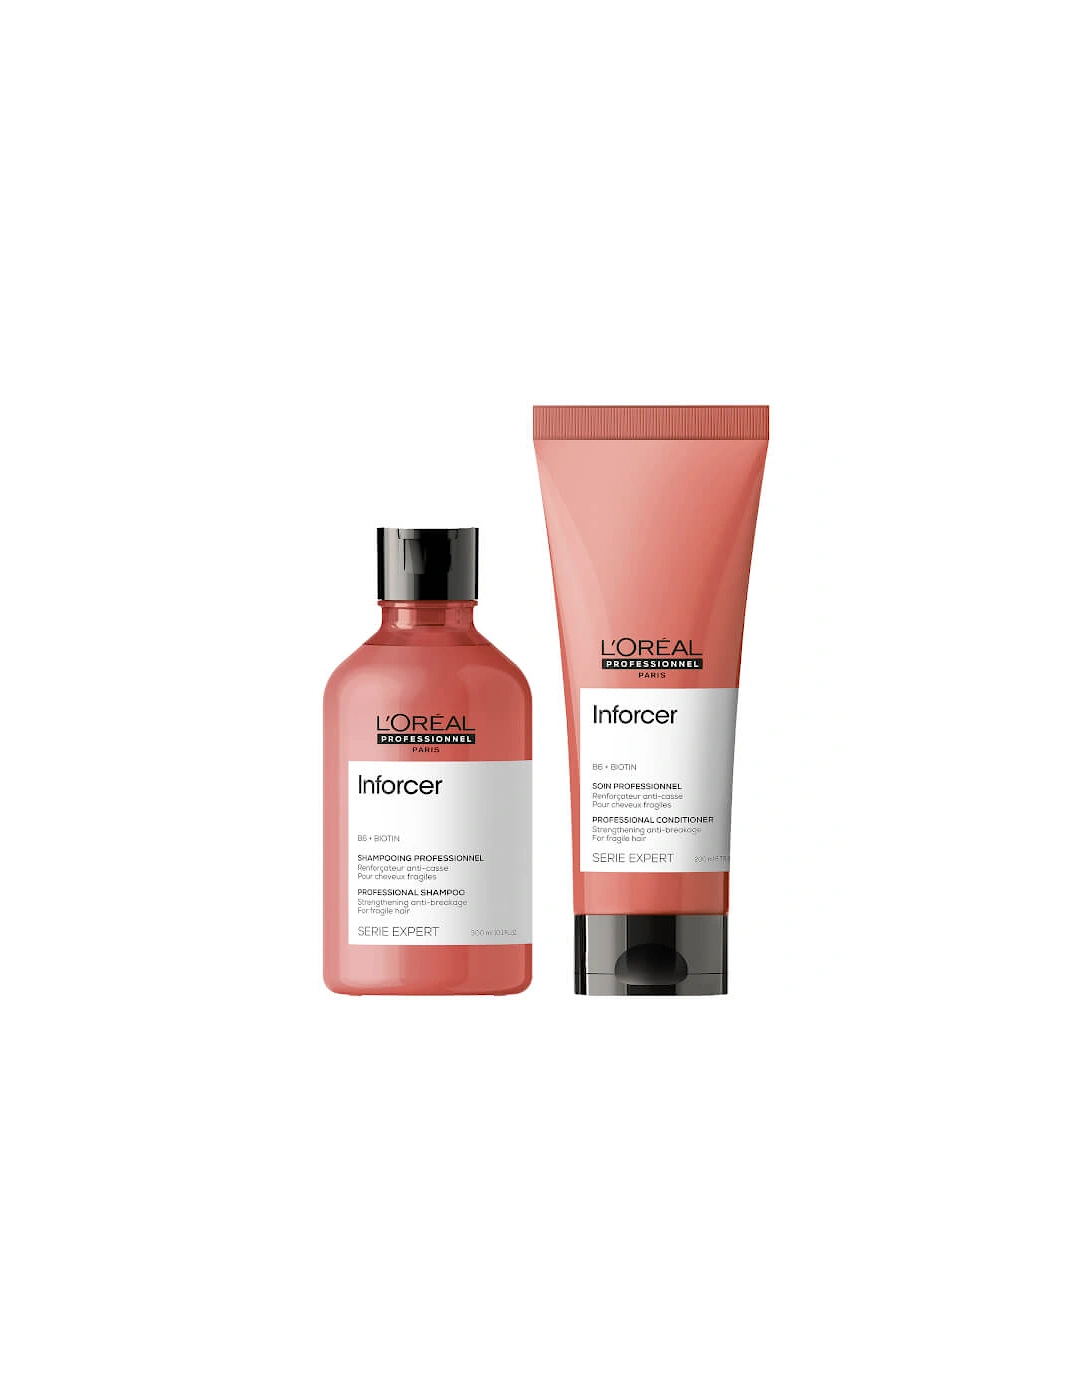 Professionnel Serie Expert Inforcer Shampoo and Conditioner Duo - Professionnel, 2 of 1